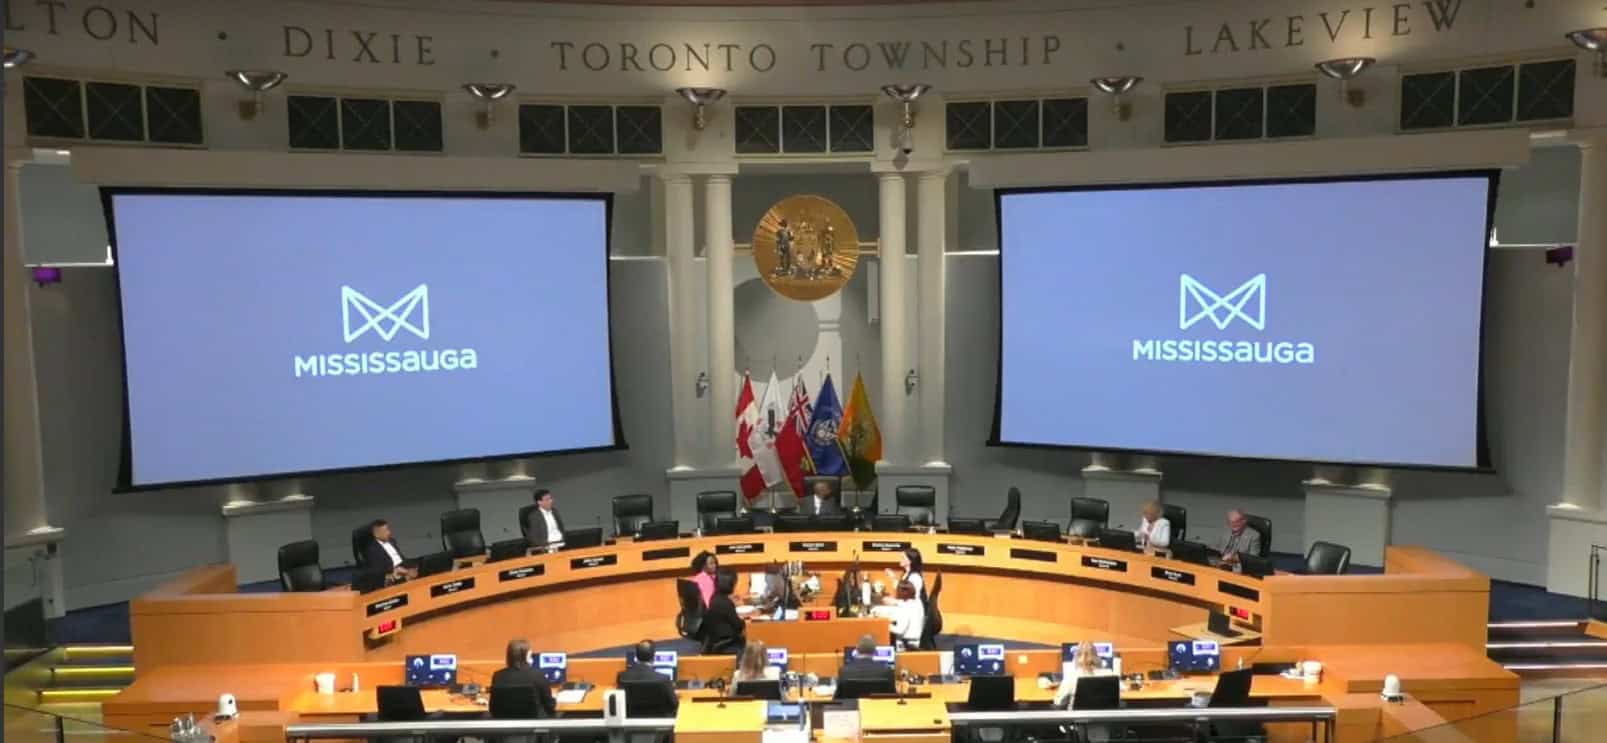 Councillor accuses Mississauga mayoral candidate of violating city's code of conduct.